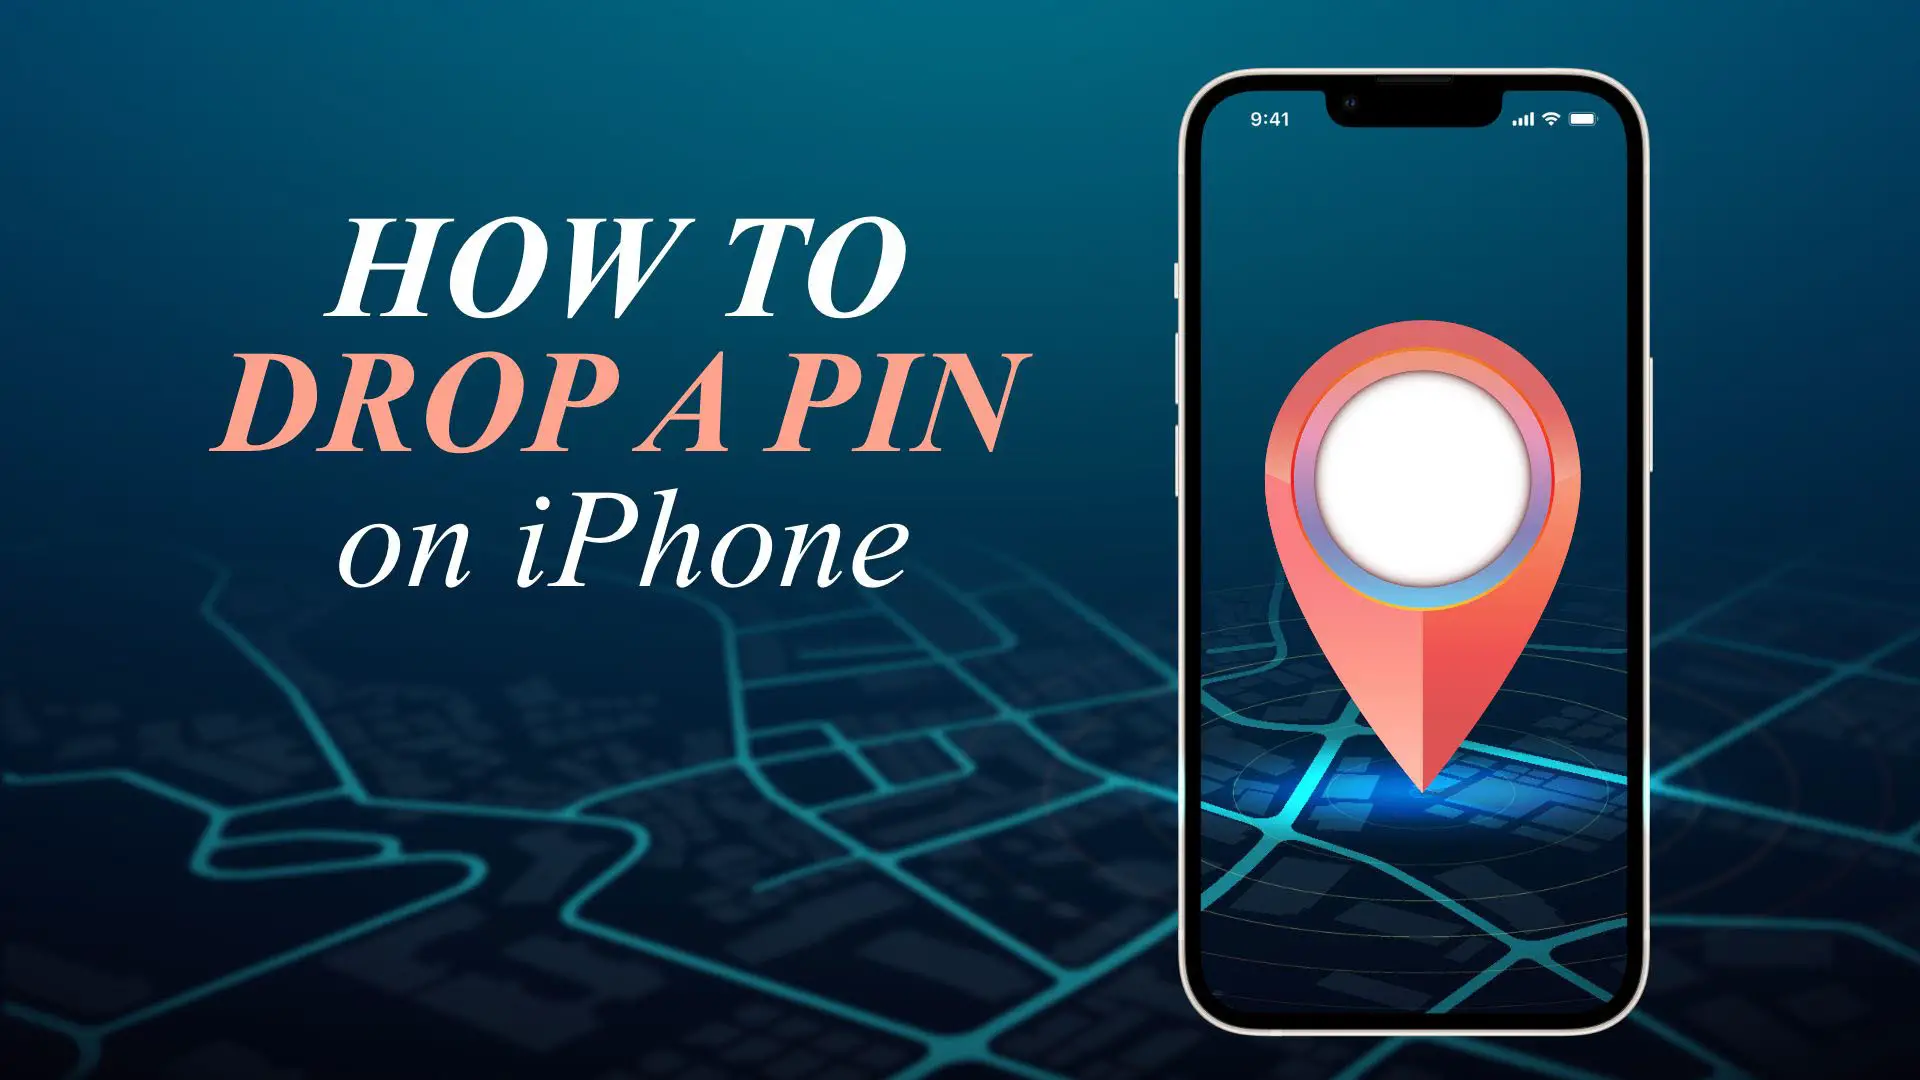 How to Drop a Pin on iPhone using Apple and Google Maps